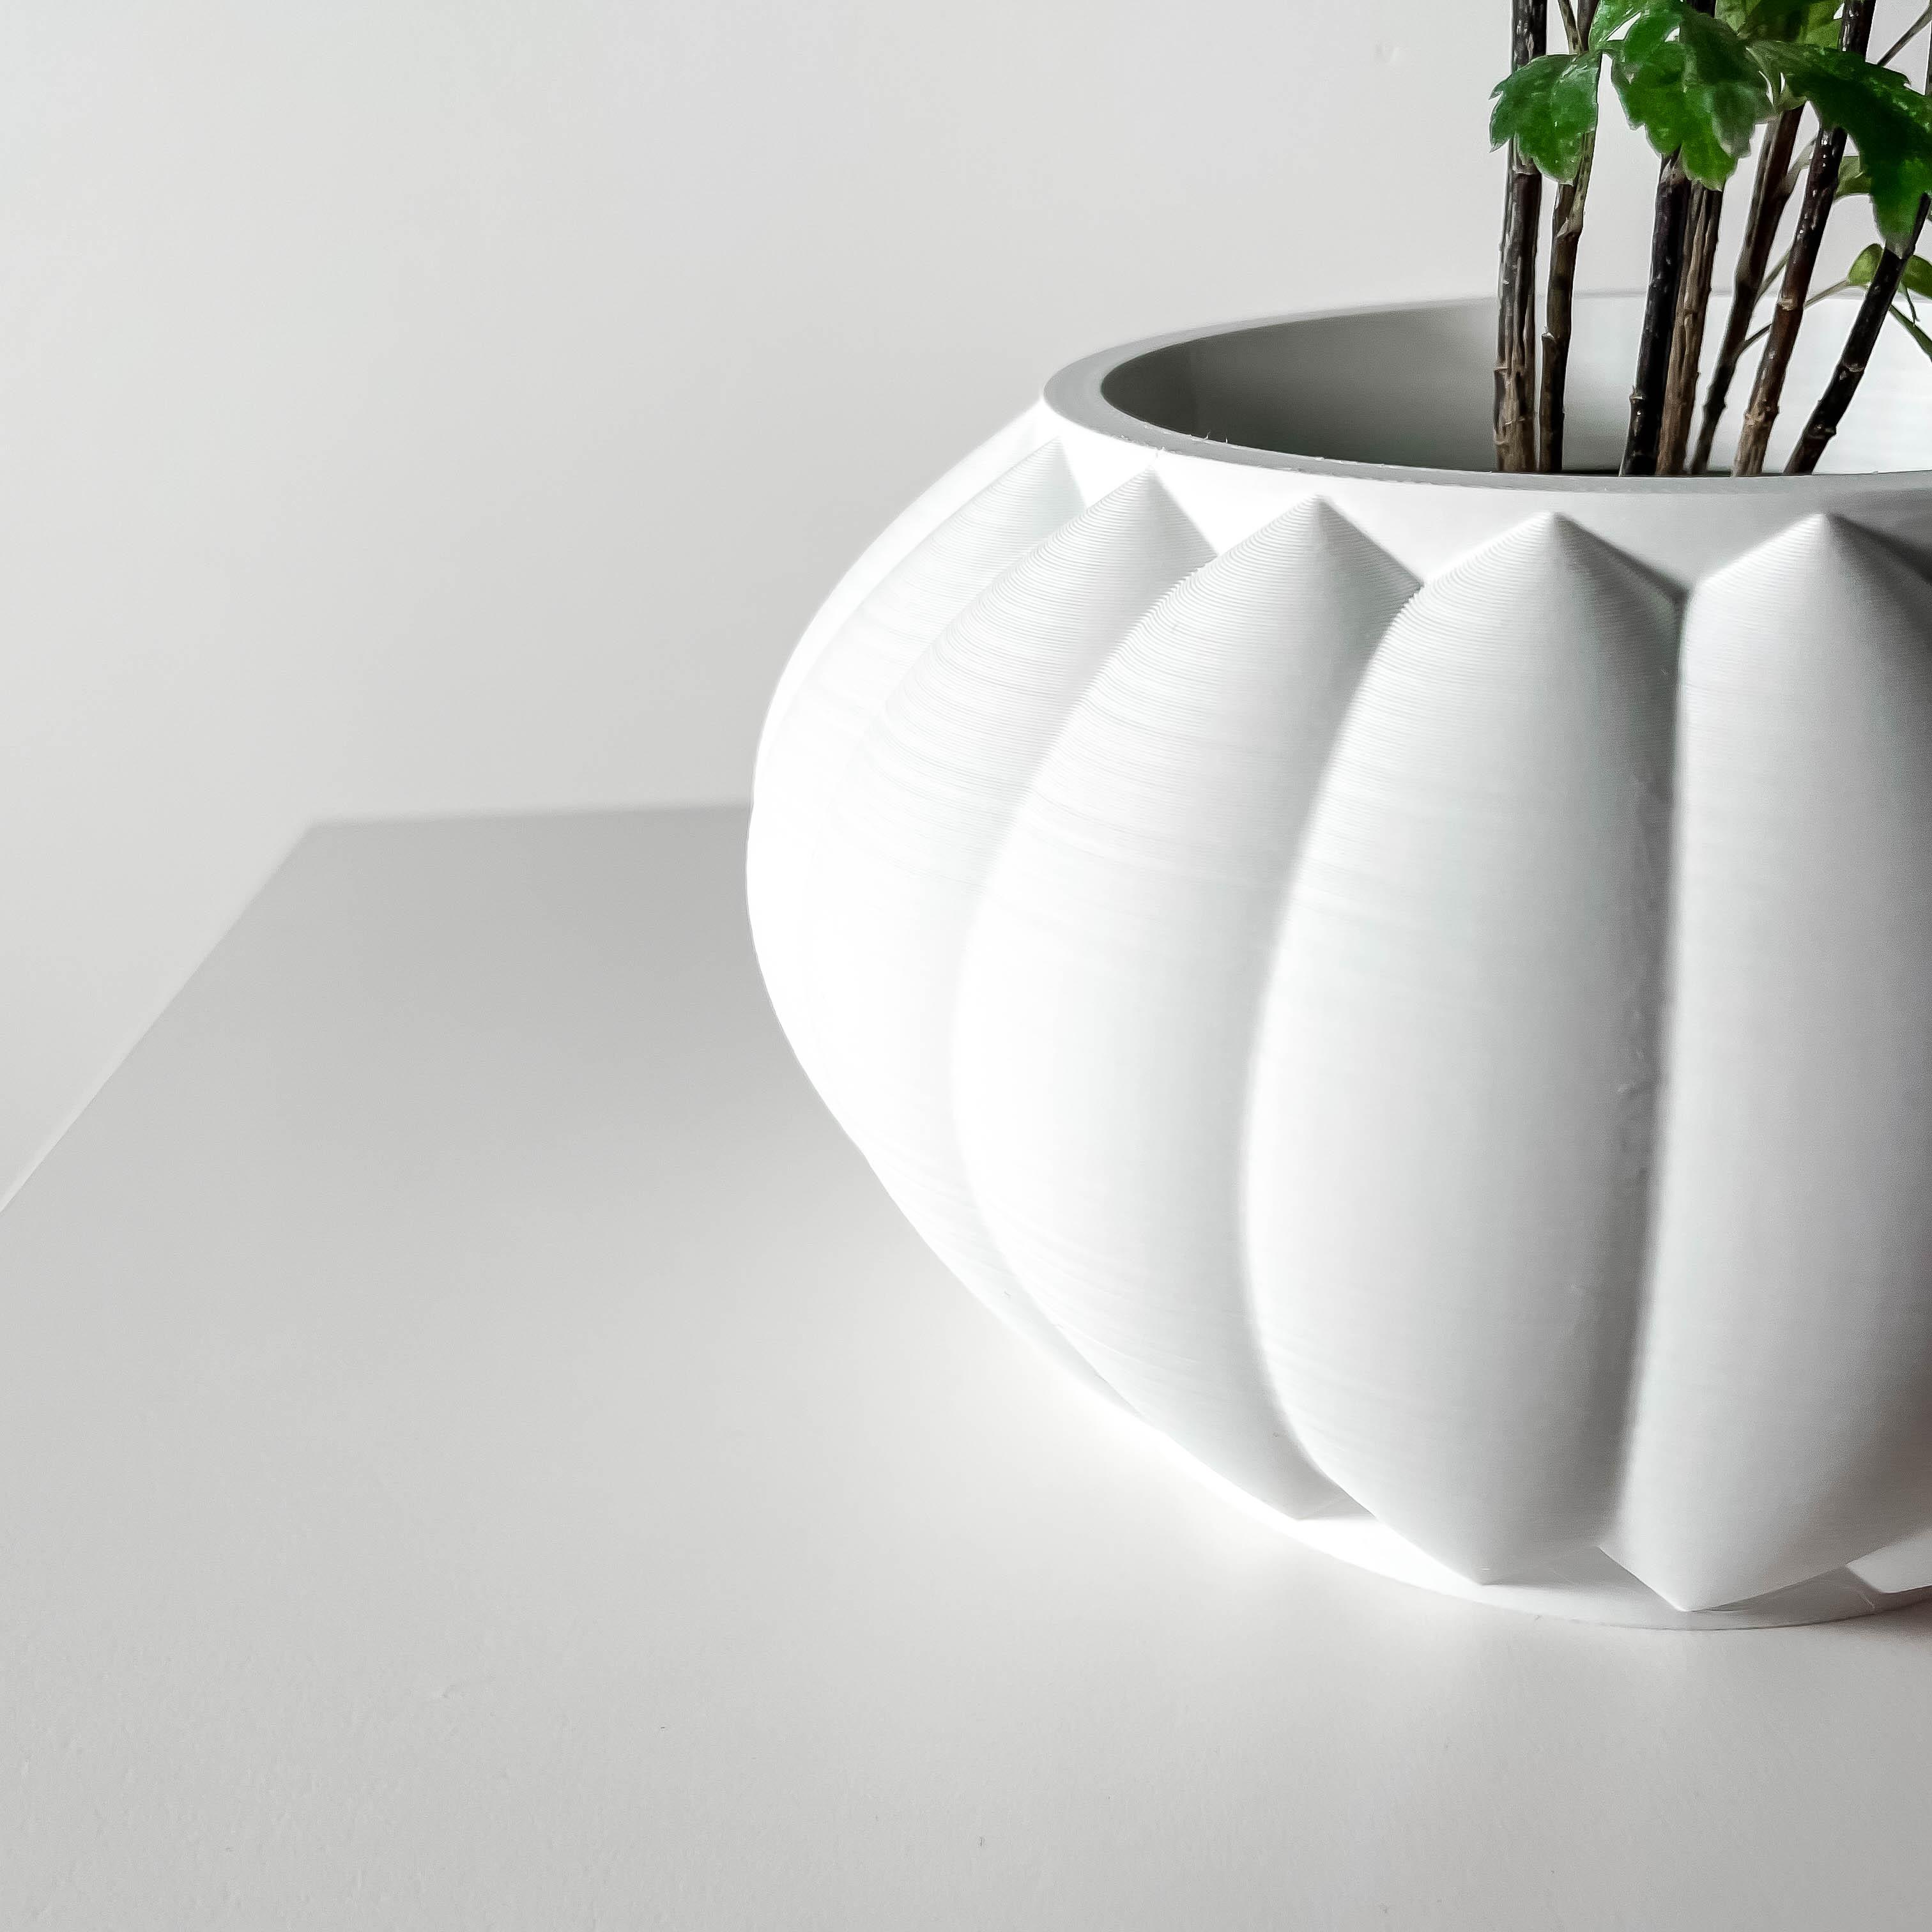 The Bunos Planter Pot with Drainage Tray & Stand | Modern and Unique Home Decor for Plants 3d model